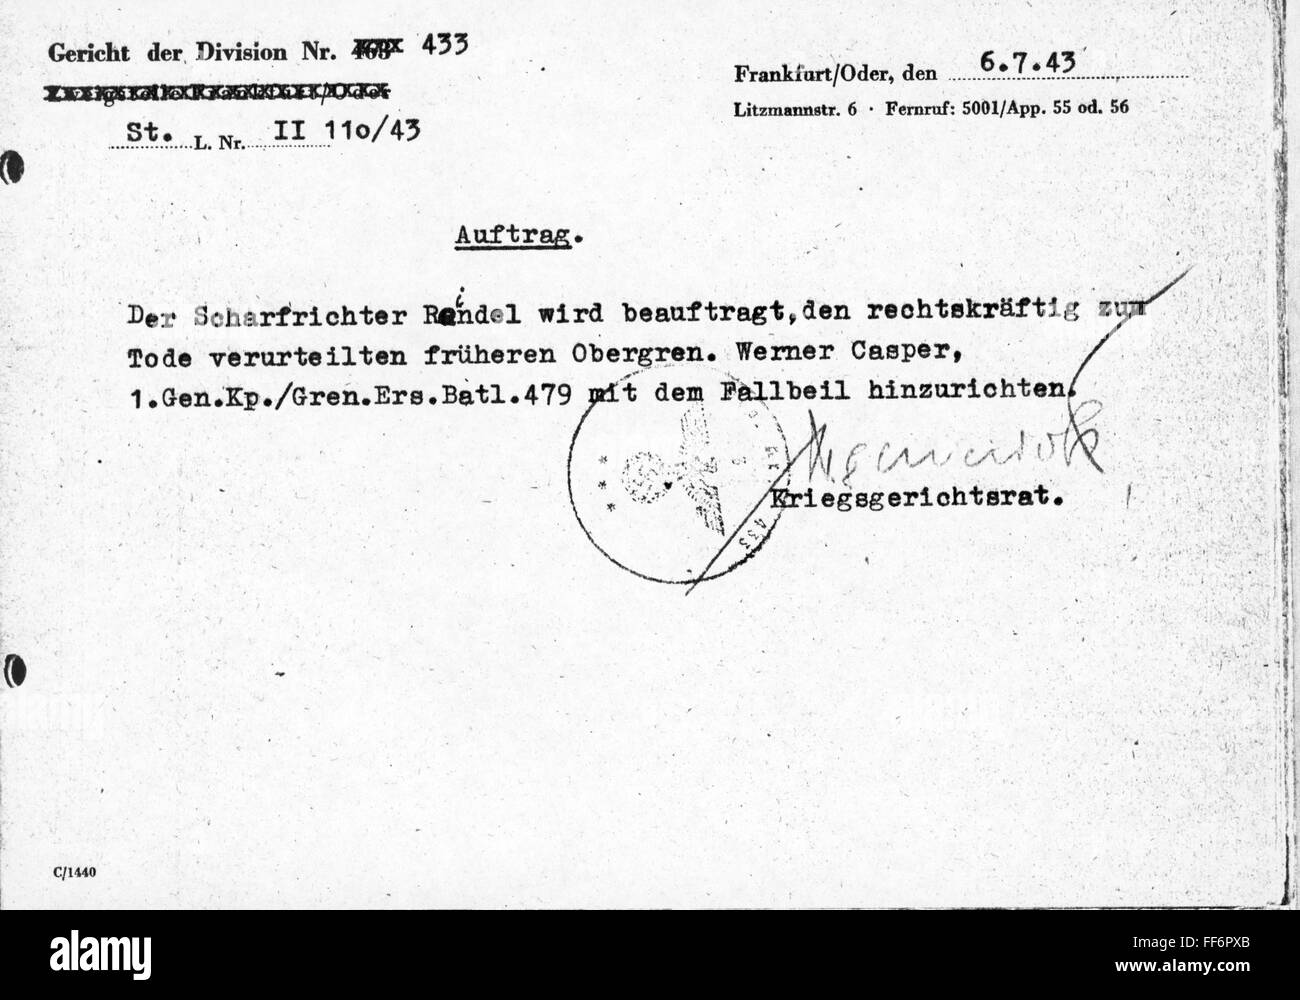 justice, documents, mandate of the executioner Ernst Reindel to execute private first class Werner Casper, issued by the court of the 433rd division, Frankfurt / Oder, 6.7.1943, Additional-Rights-Clearences-Not Available Stock Photo